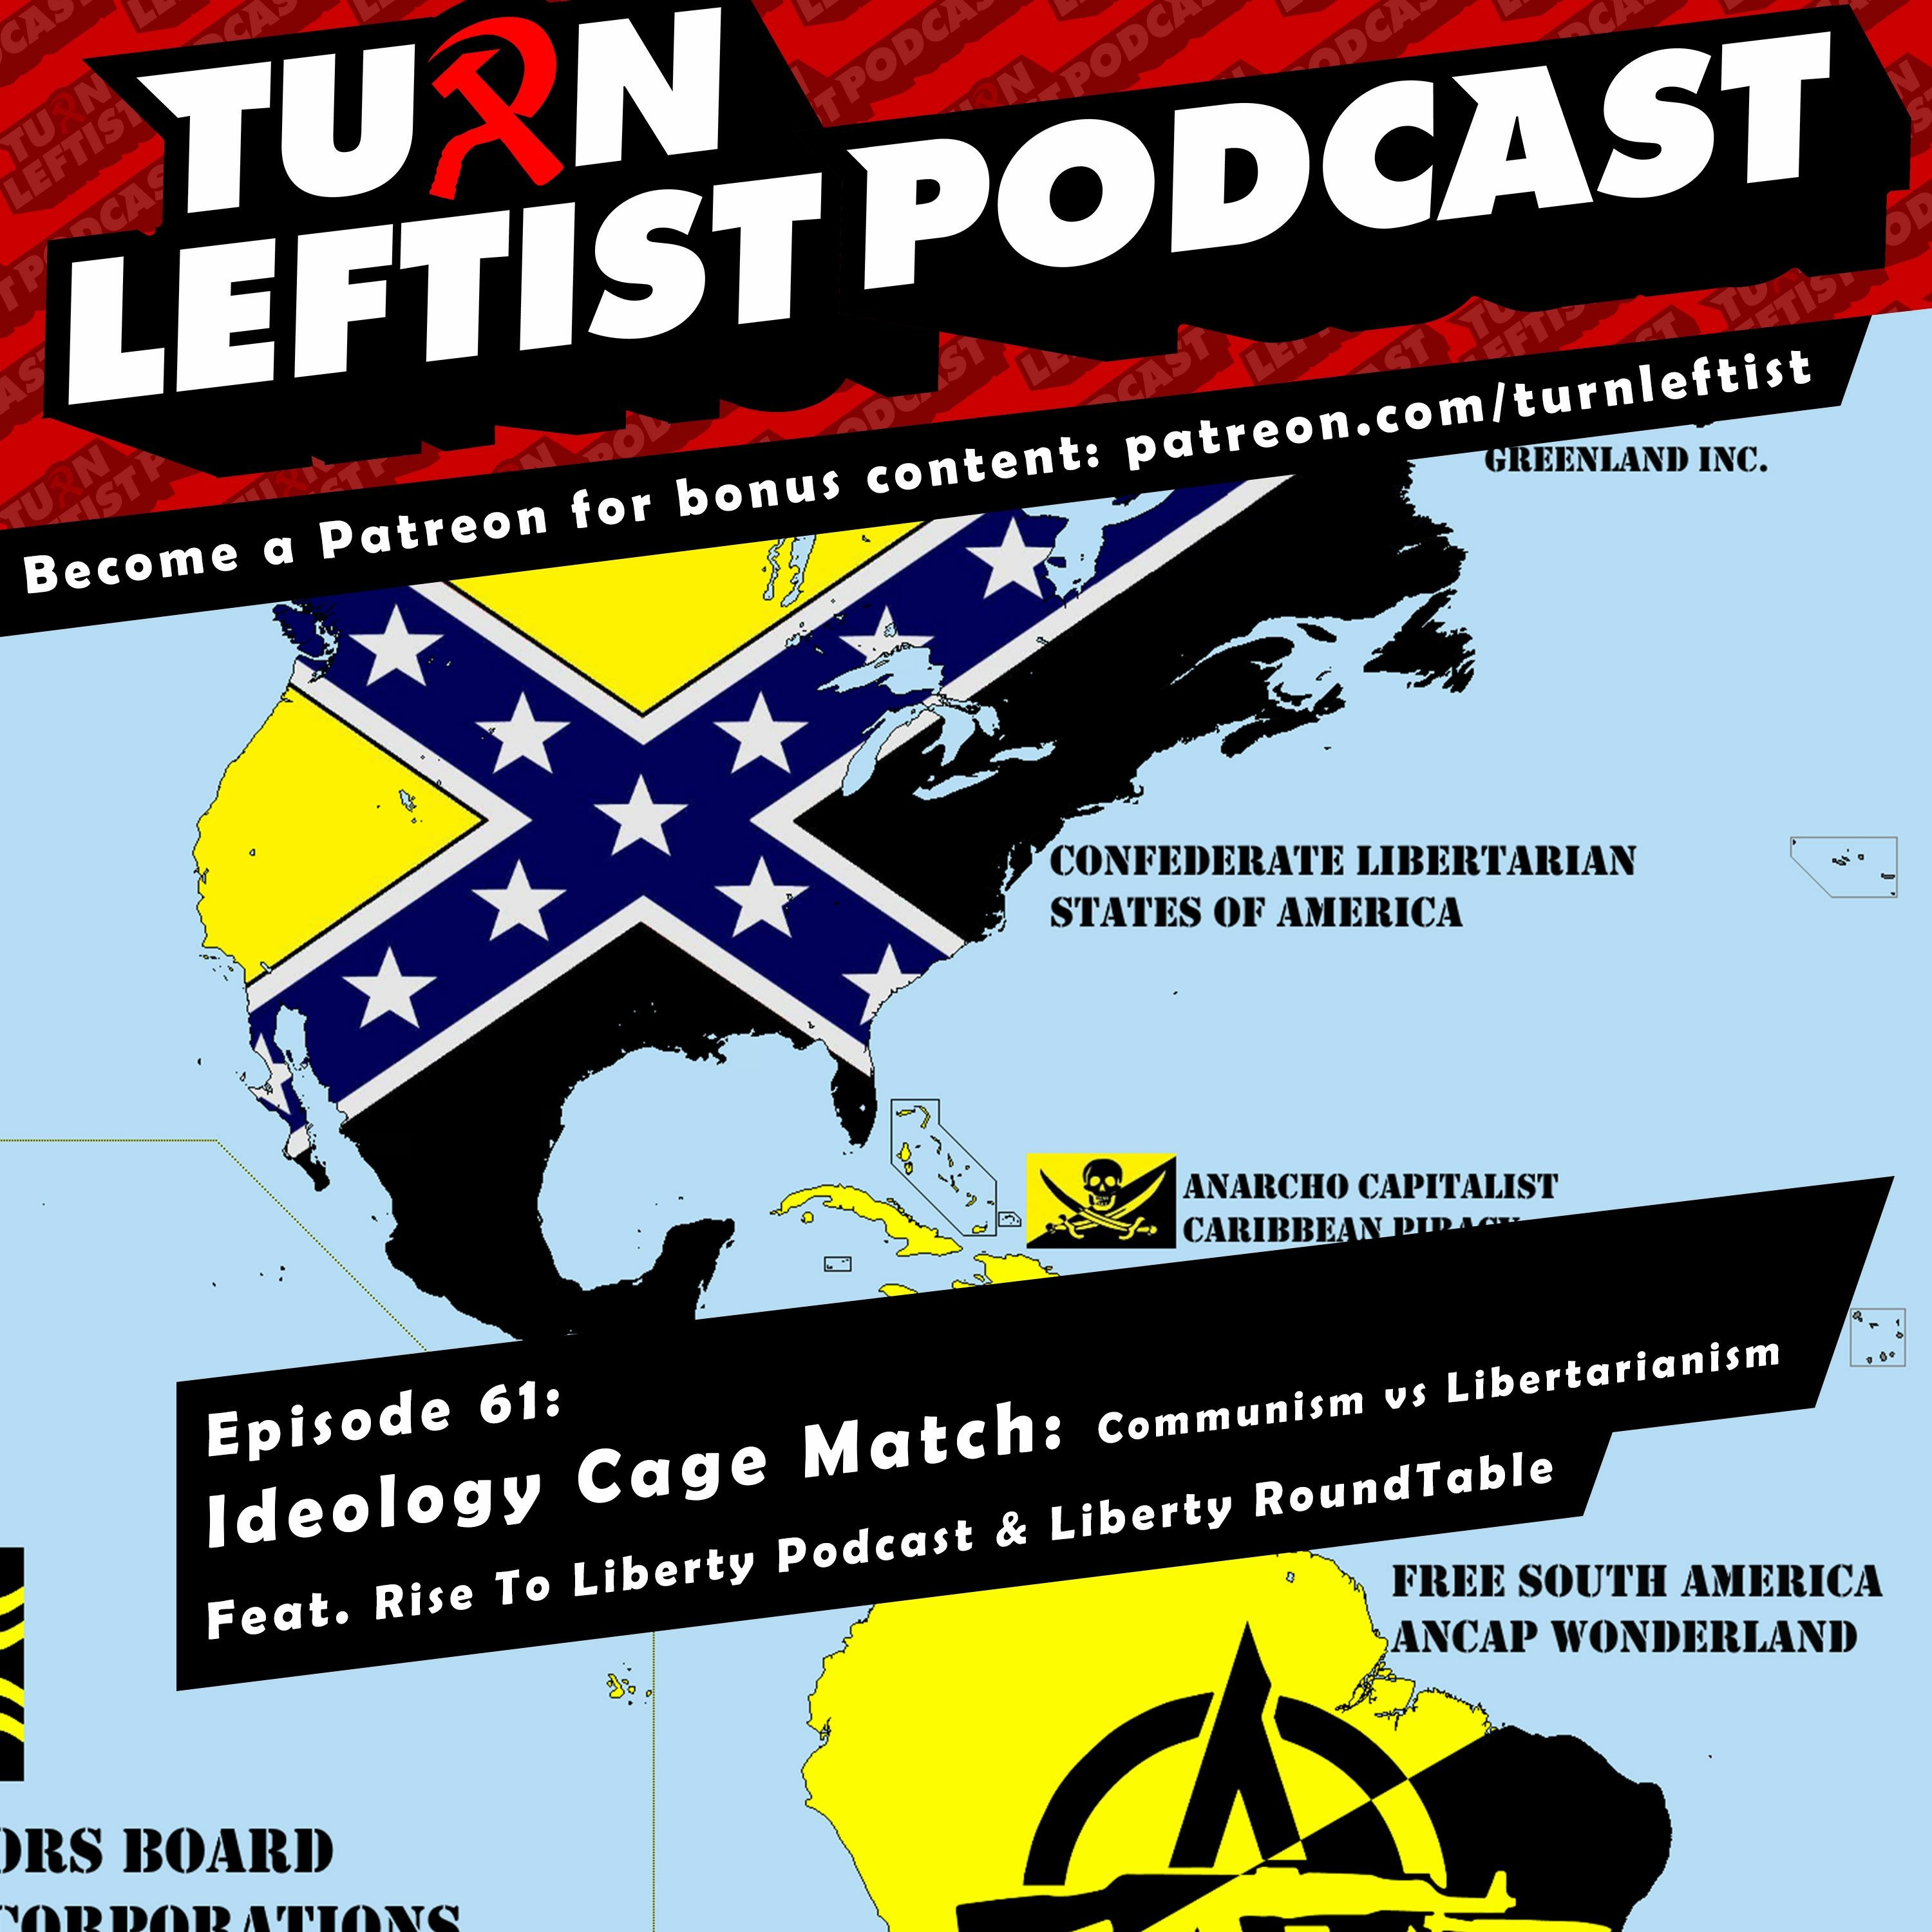 061: Ideology Cage Match: Communism vs Libertarianism feat. Rise To Liberty & Liberty RoundTable